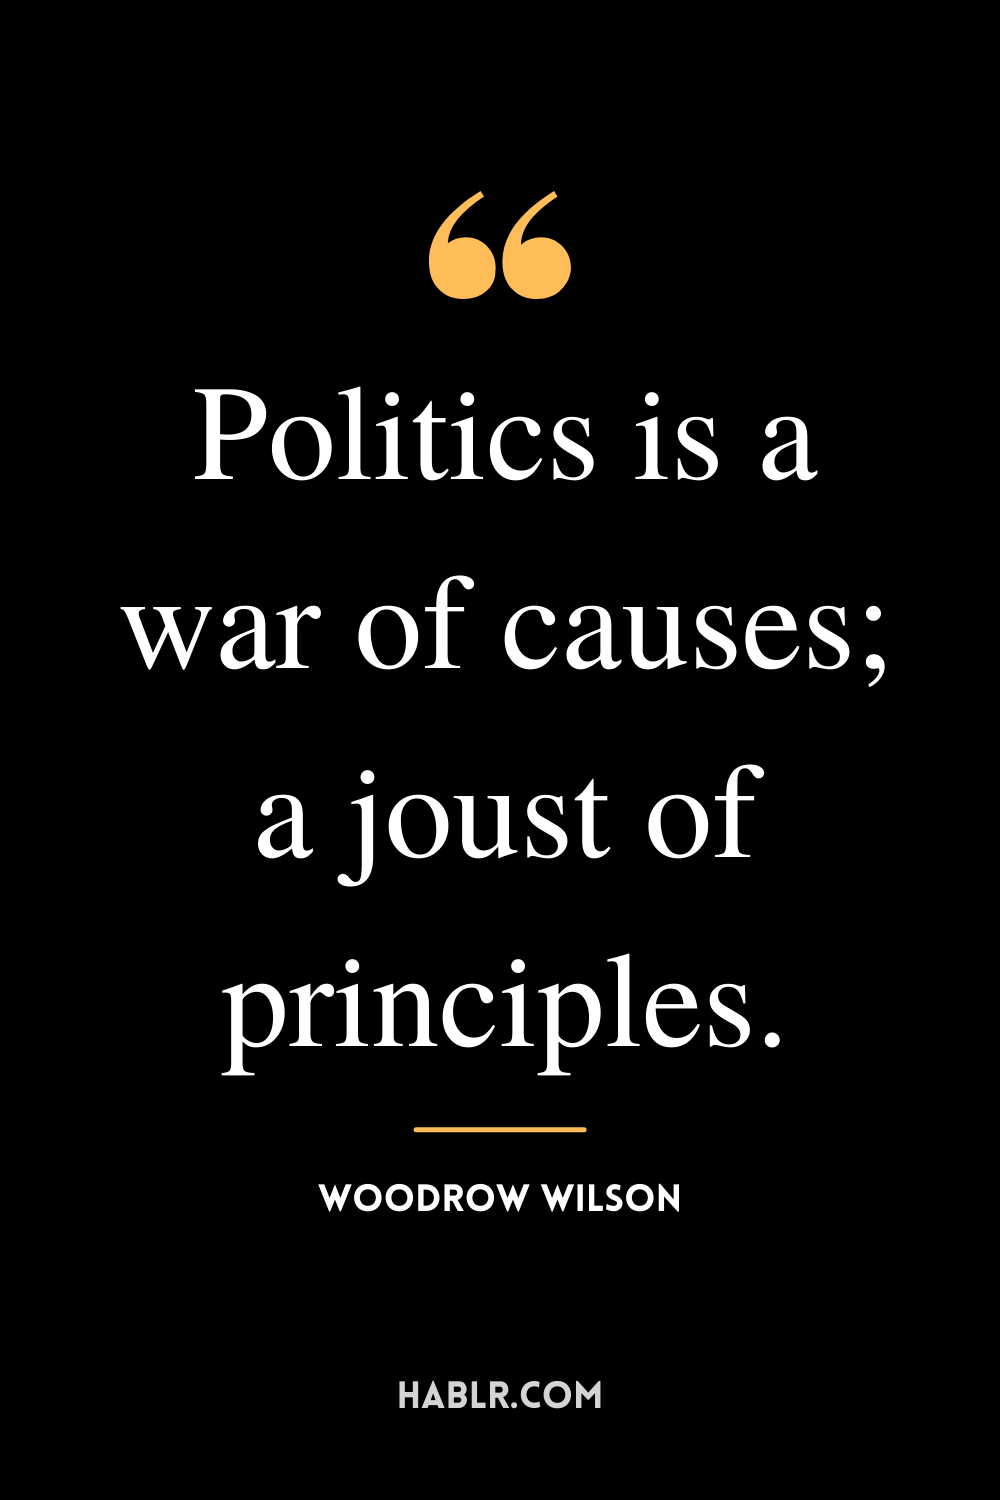 "Politics is a war of causes; a joust of principles." -Woodrow Wilson